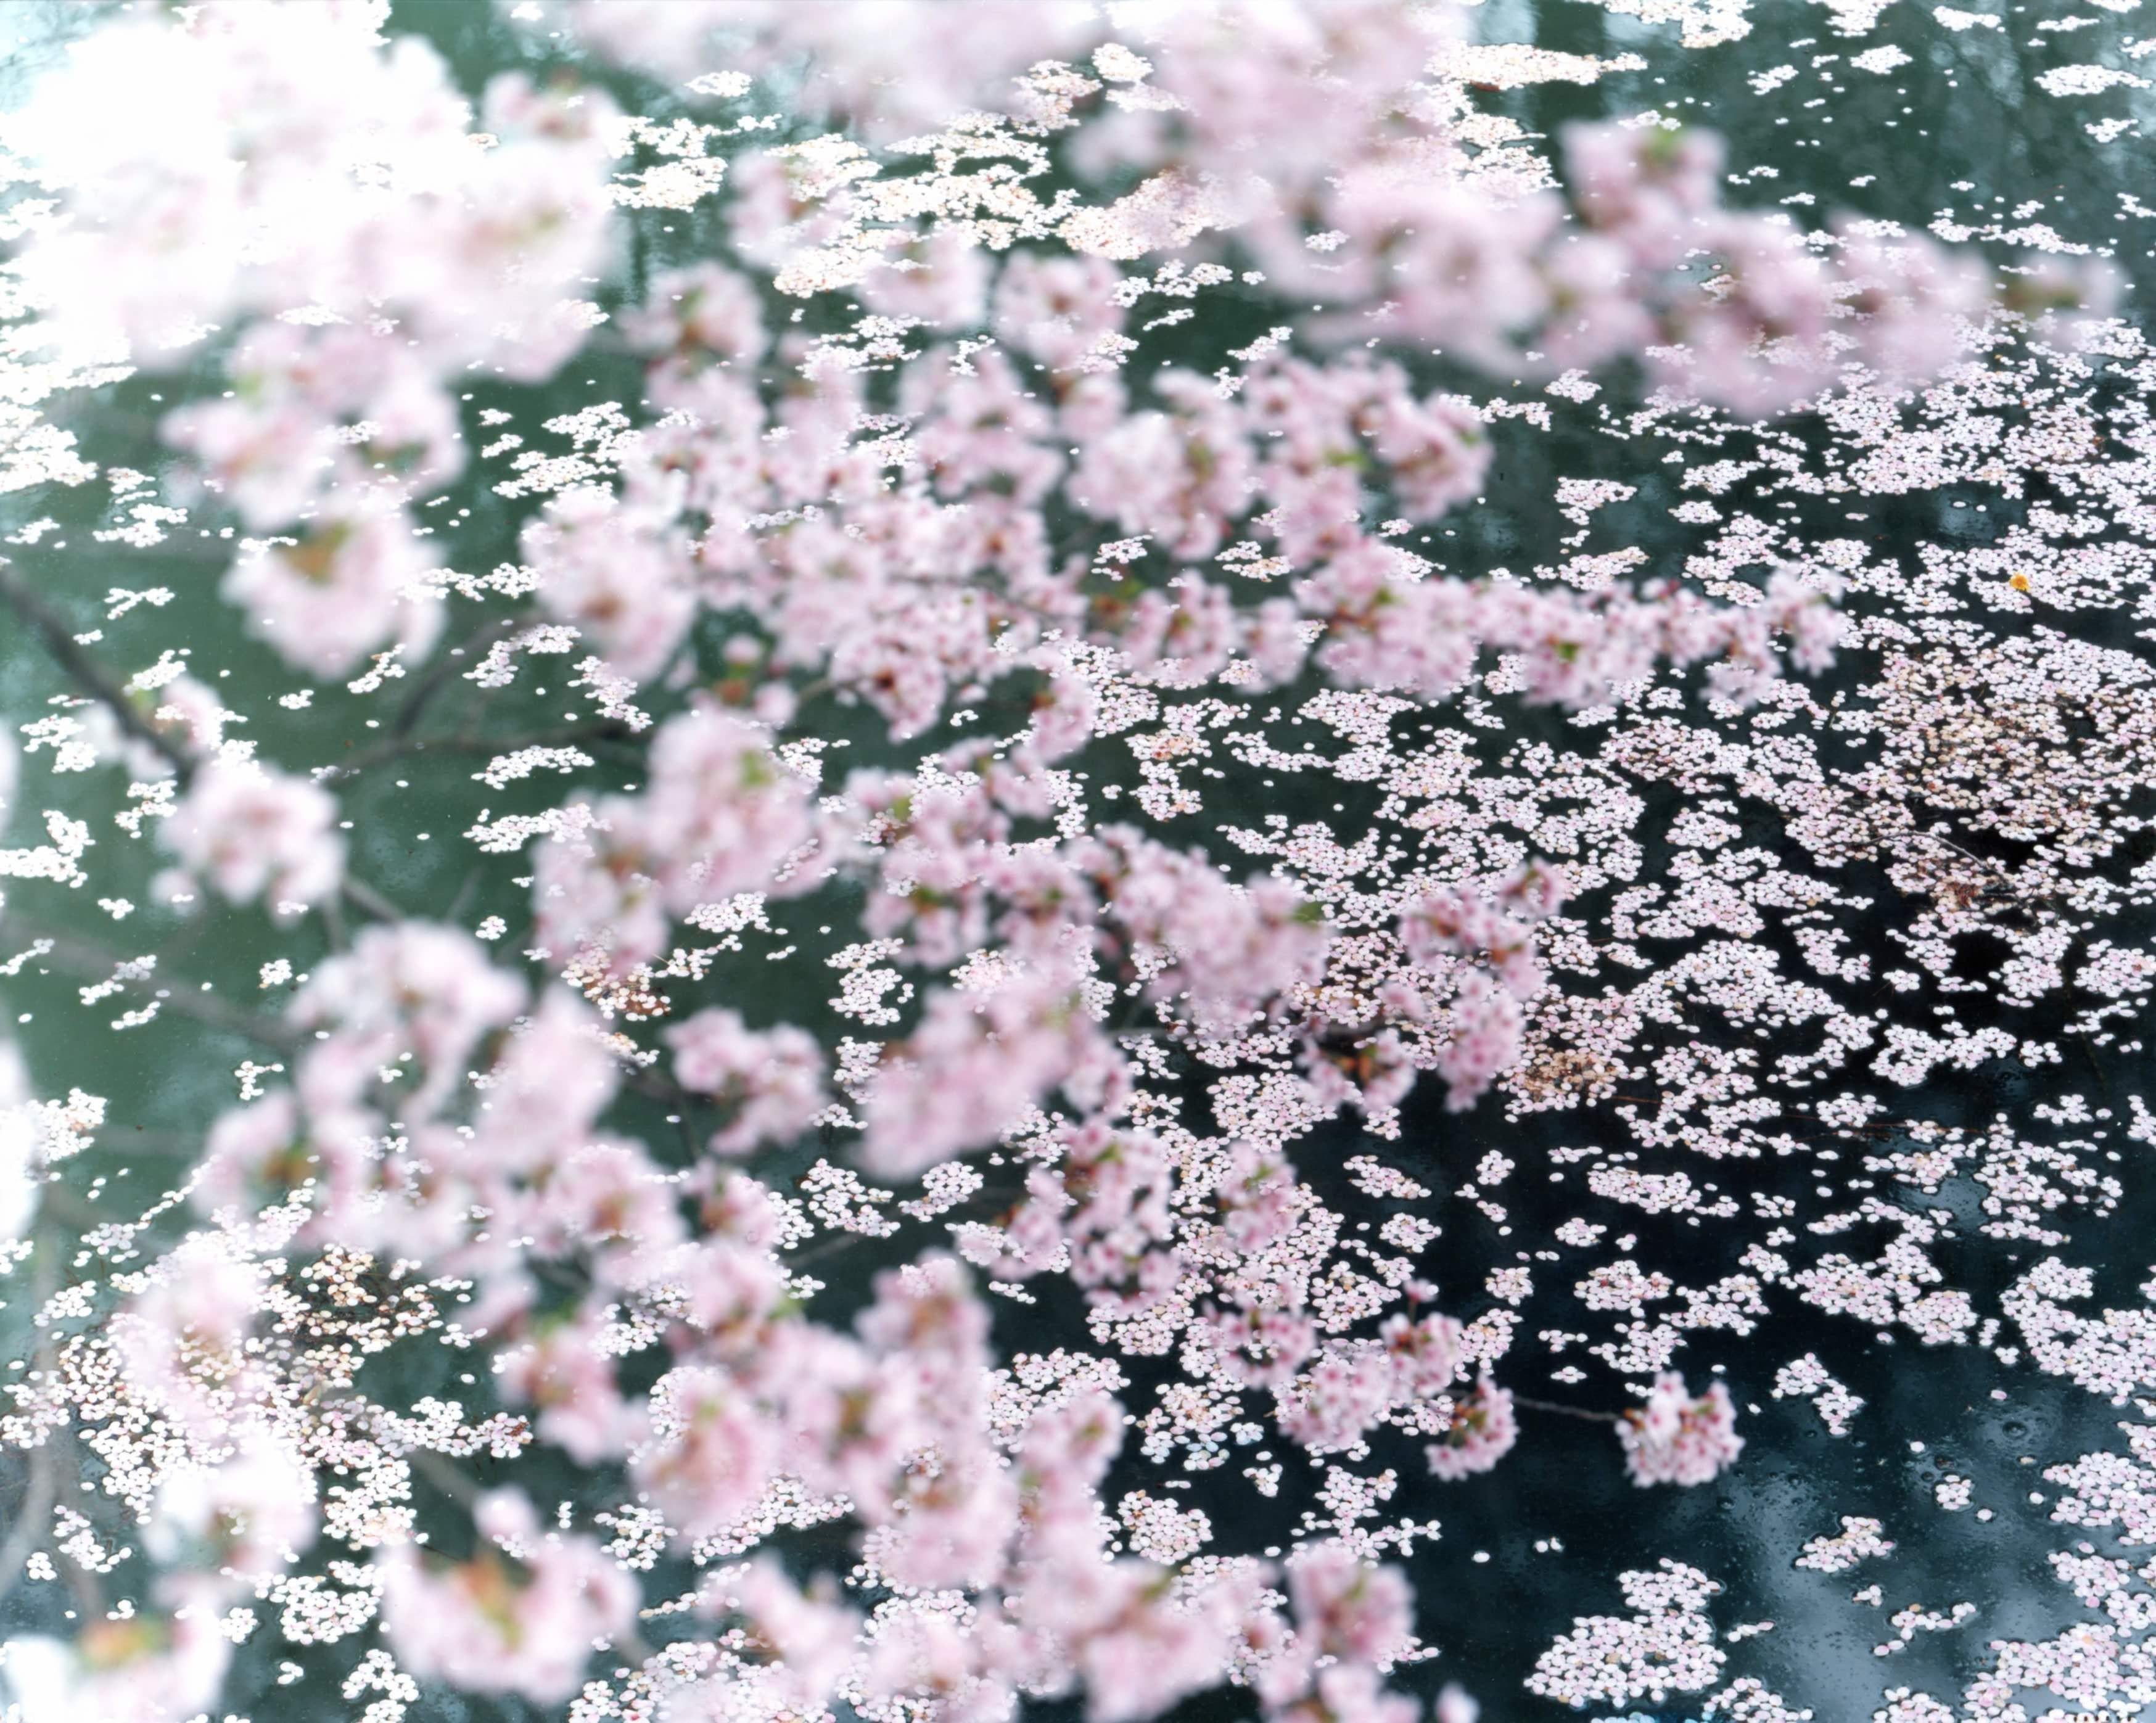 RISAKU SUZUKI (*1963, Japan)
SAKURA 10,4-72
2010
Chromogenic print
Sheet 120 x 155 cm (47 1/4 x 61 in.)
Edition of 5; Ed. no. 3/5
Framed

The Sakura (Japanese term for ‘cherry blossoms’) Celebration commences in early spring and has inspired artists